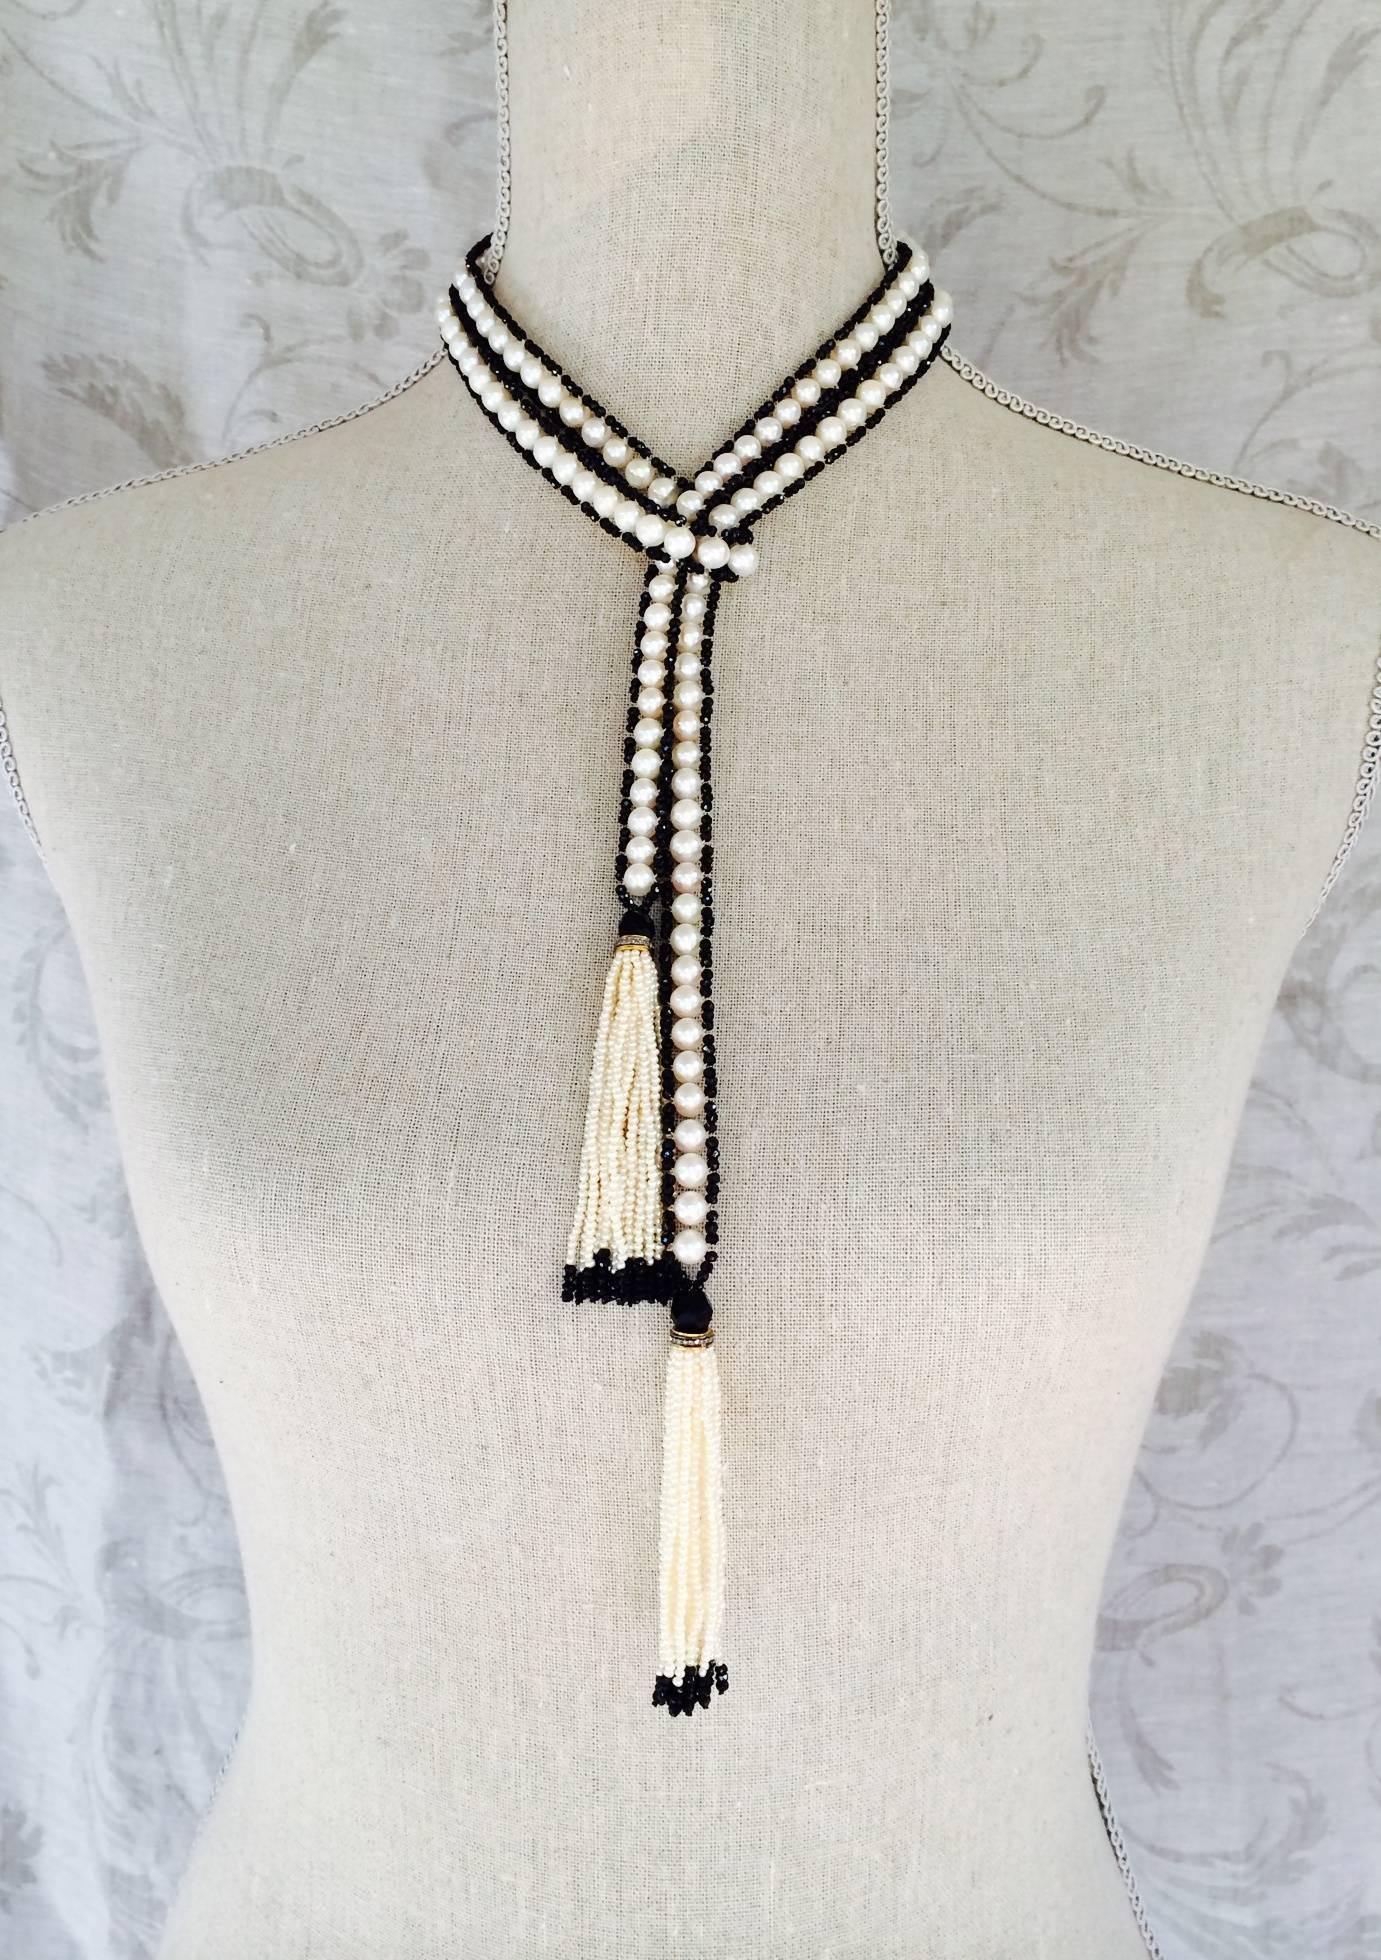 This decadent and lovely sautoir measures 52 inches with its tassels. Each of the tassels measures 3.1/4 inches long. 6 mm white pearls and 1mm faceted black spinel beads. 6mm black onyx faceted beads on top of each tassel and diamond, silver and